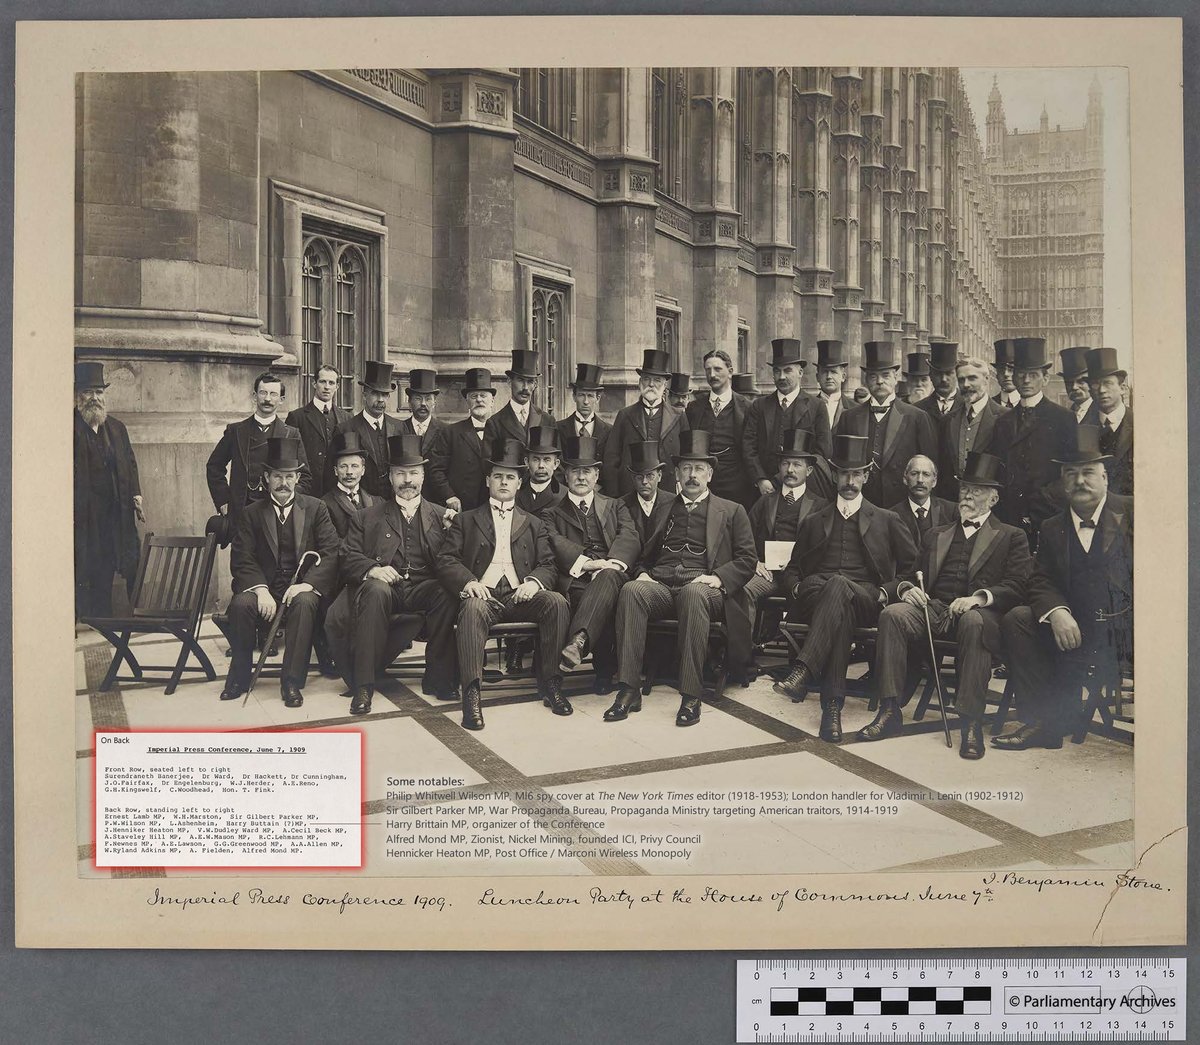 "Sir Benjamin Stone, photog. (Jun. 07, 1909). Luncheon Party at the House of Commons. Imperial Press Conference 1909, HC/LB/1/111/20/69. UK Parliamentary Archives." https://www.fbcoverup.com/docs/library/1909-06-07-Luncheon-Party-at-the-House-of-Commons-Benjamin-Stone-photog-Imperial-Press-Conference-1909-HC-LB-1-111-20-69-UK-Parliamentary-Archives-Jun-07-1909.pdf